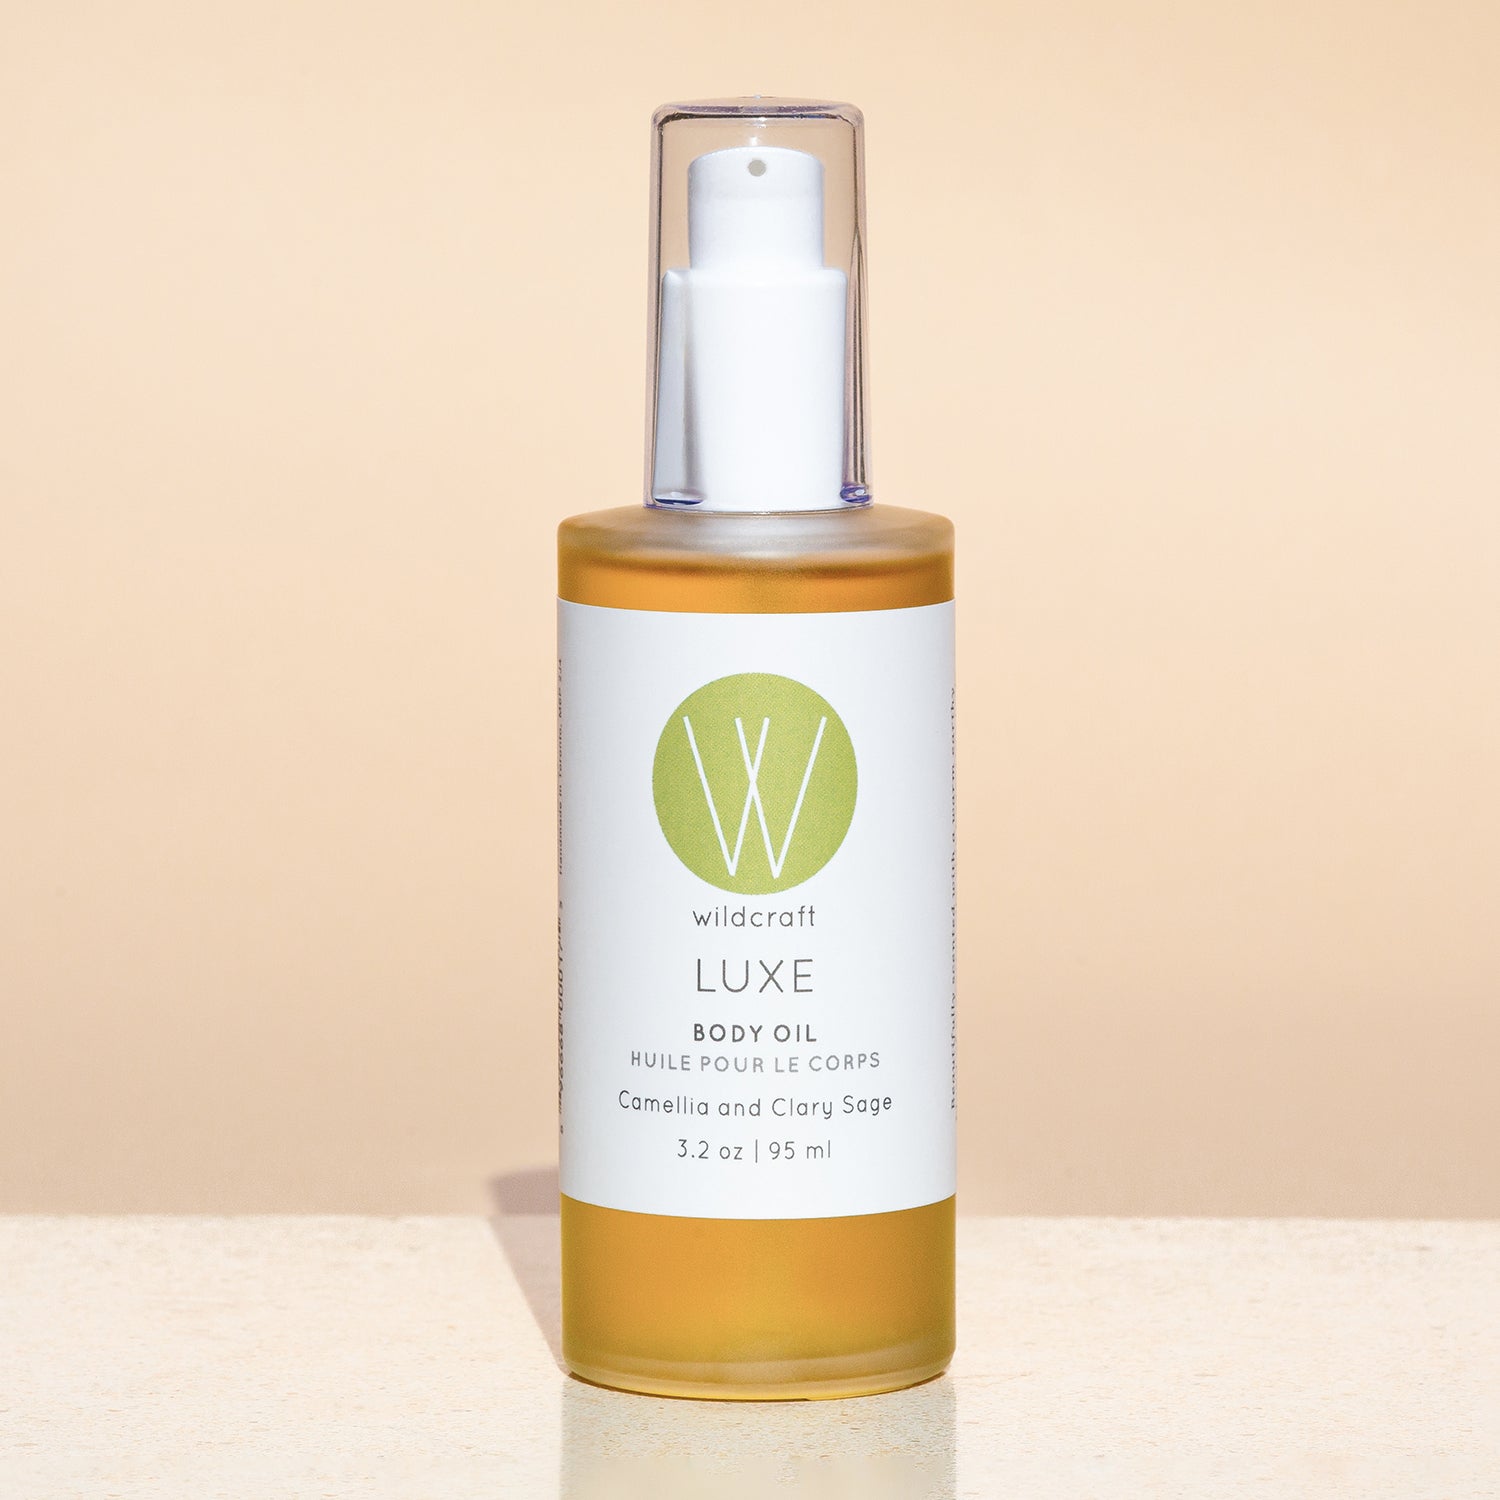 Bottle of Luxe Body Oil on a simple background